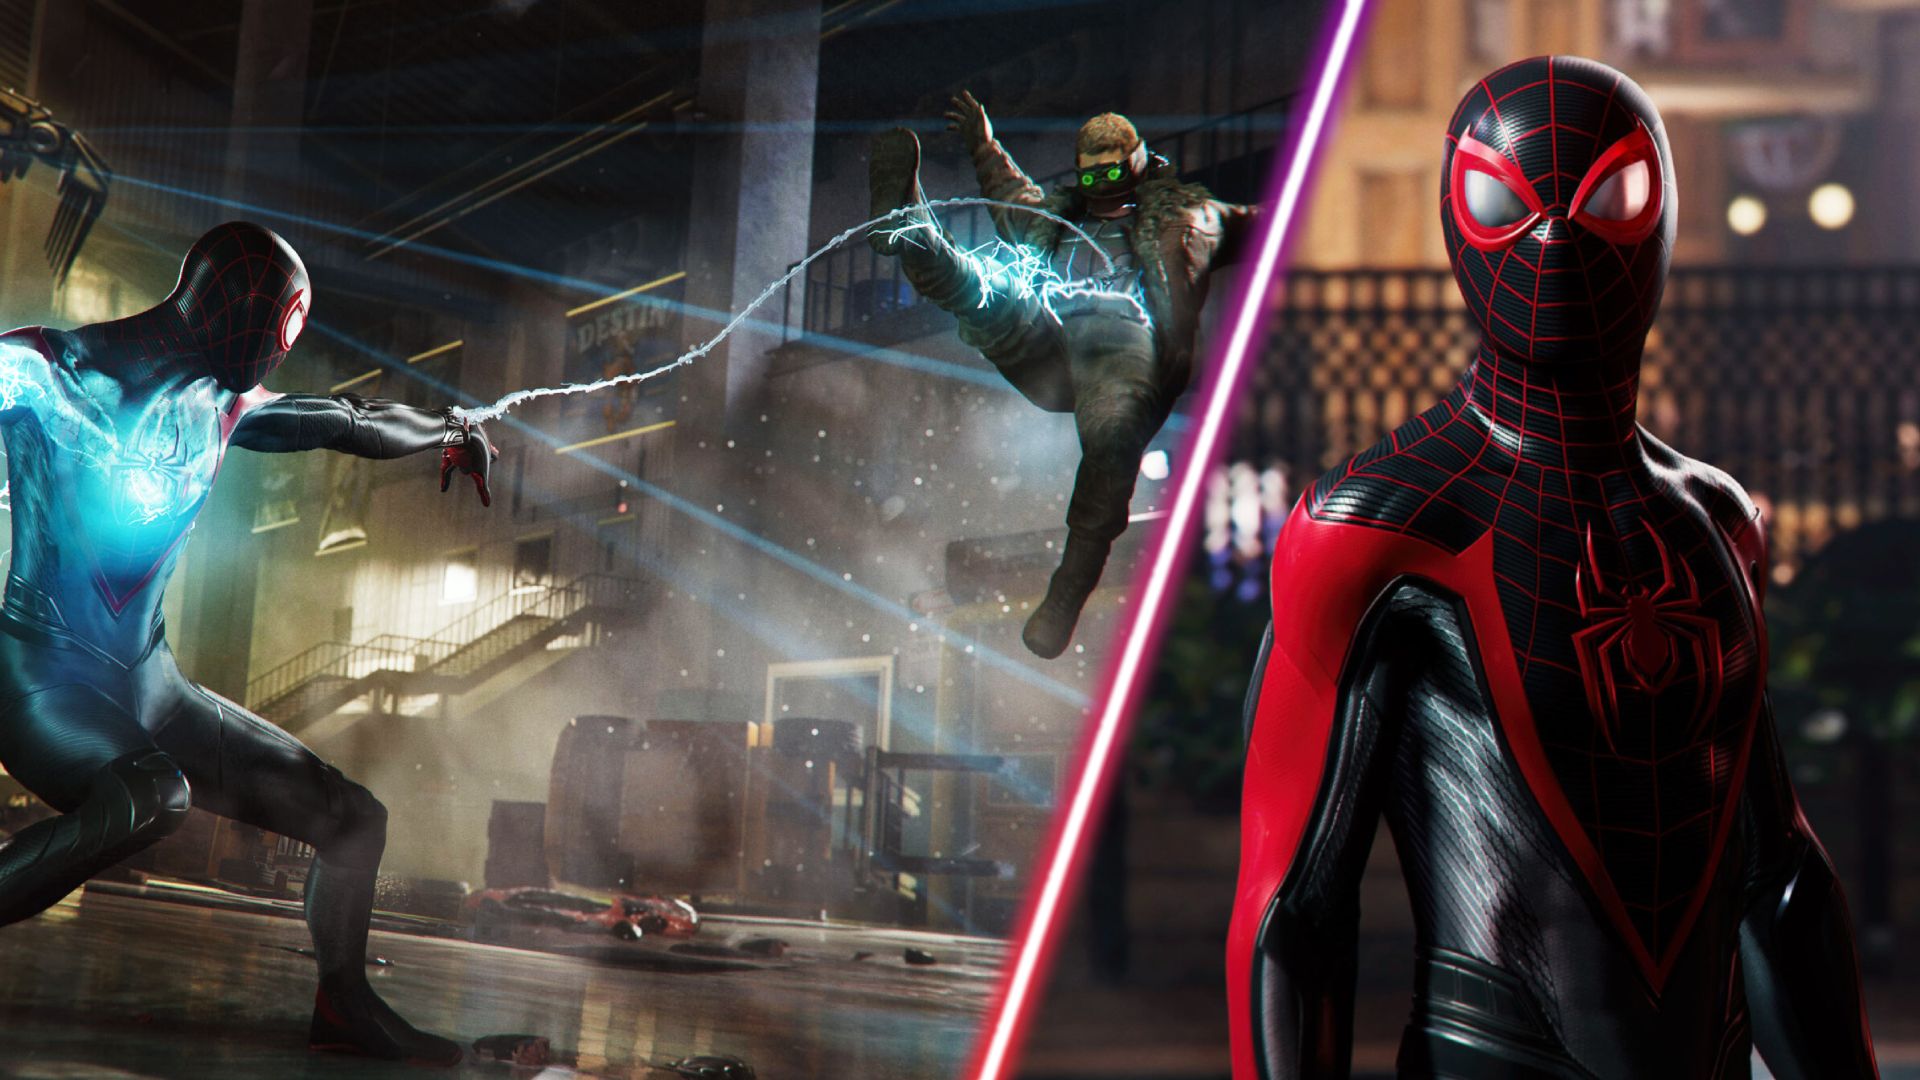 Marvel's Spider-Man 2 Main Menu Concept Looks Like the Real Deal in Motion